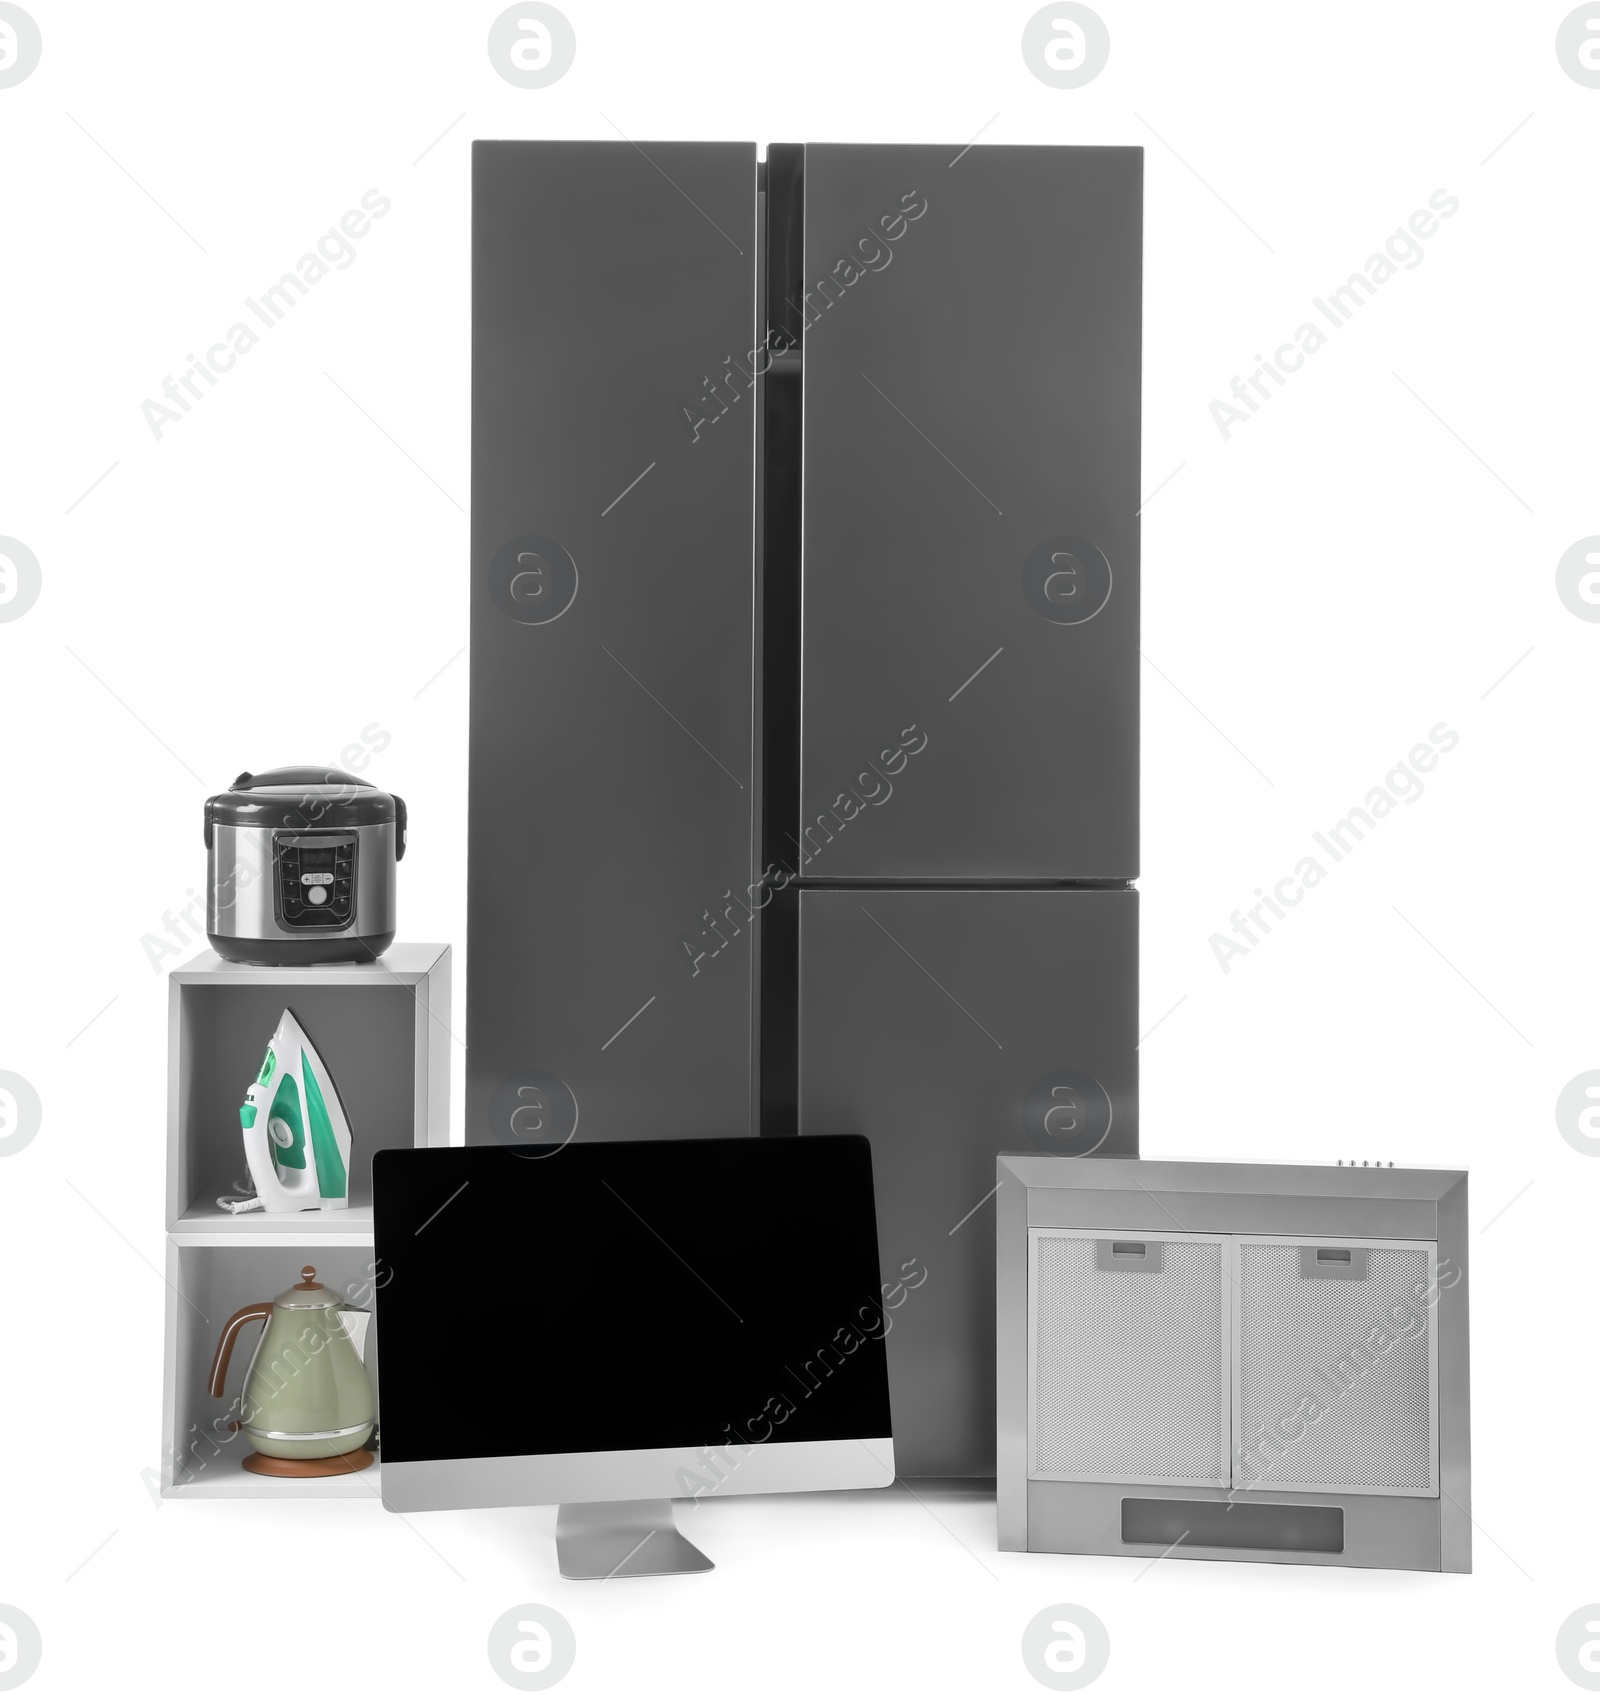 Photo of Modern refrigerator and domestic appliances isolated on white